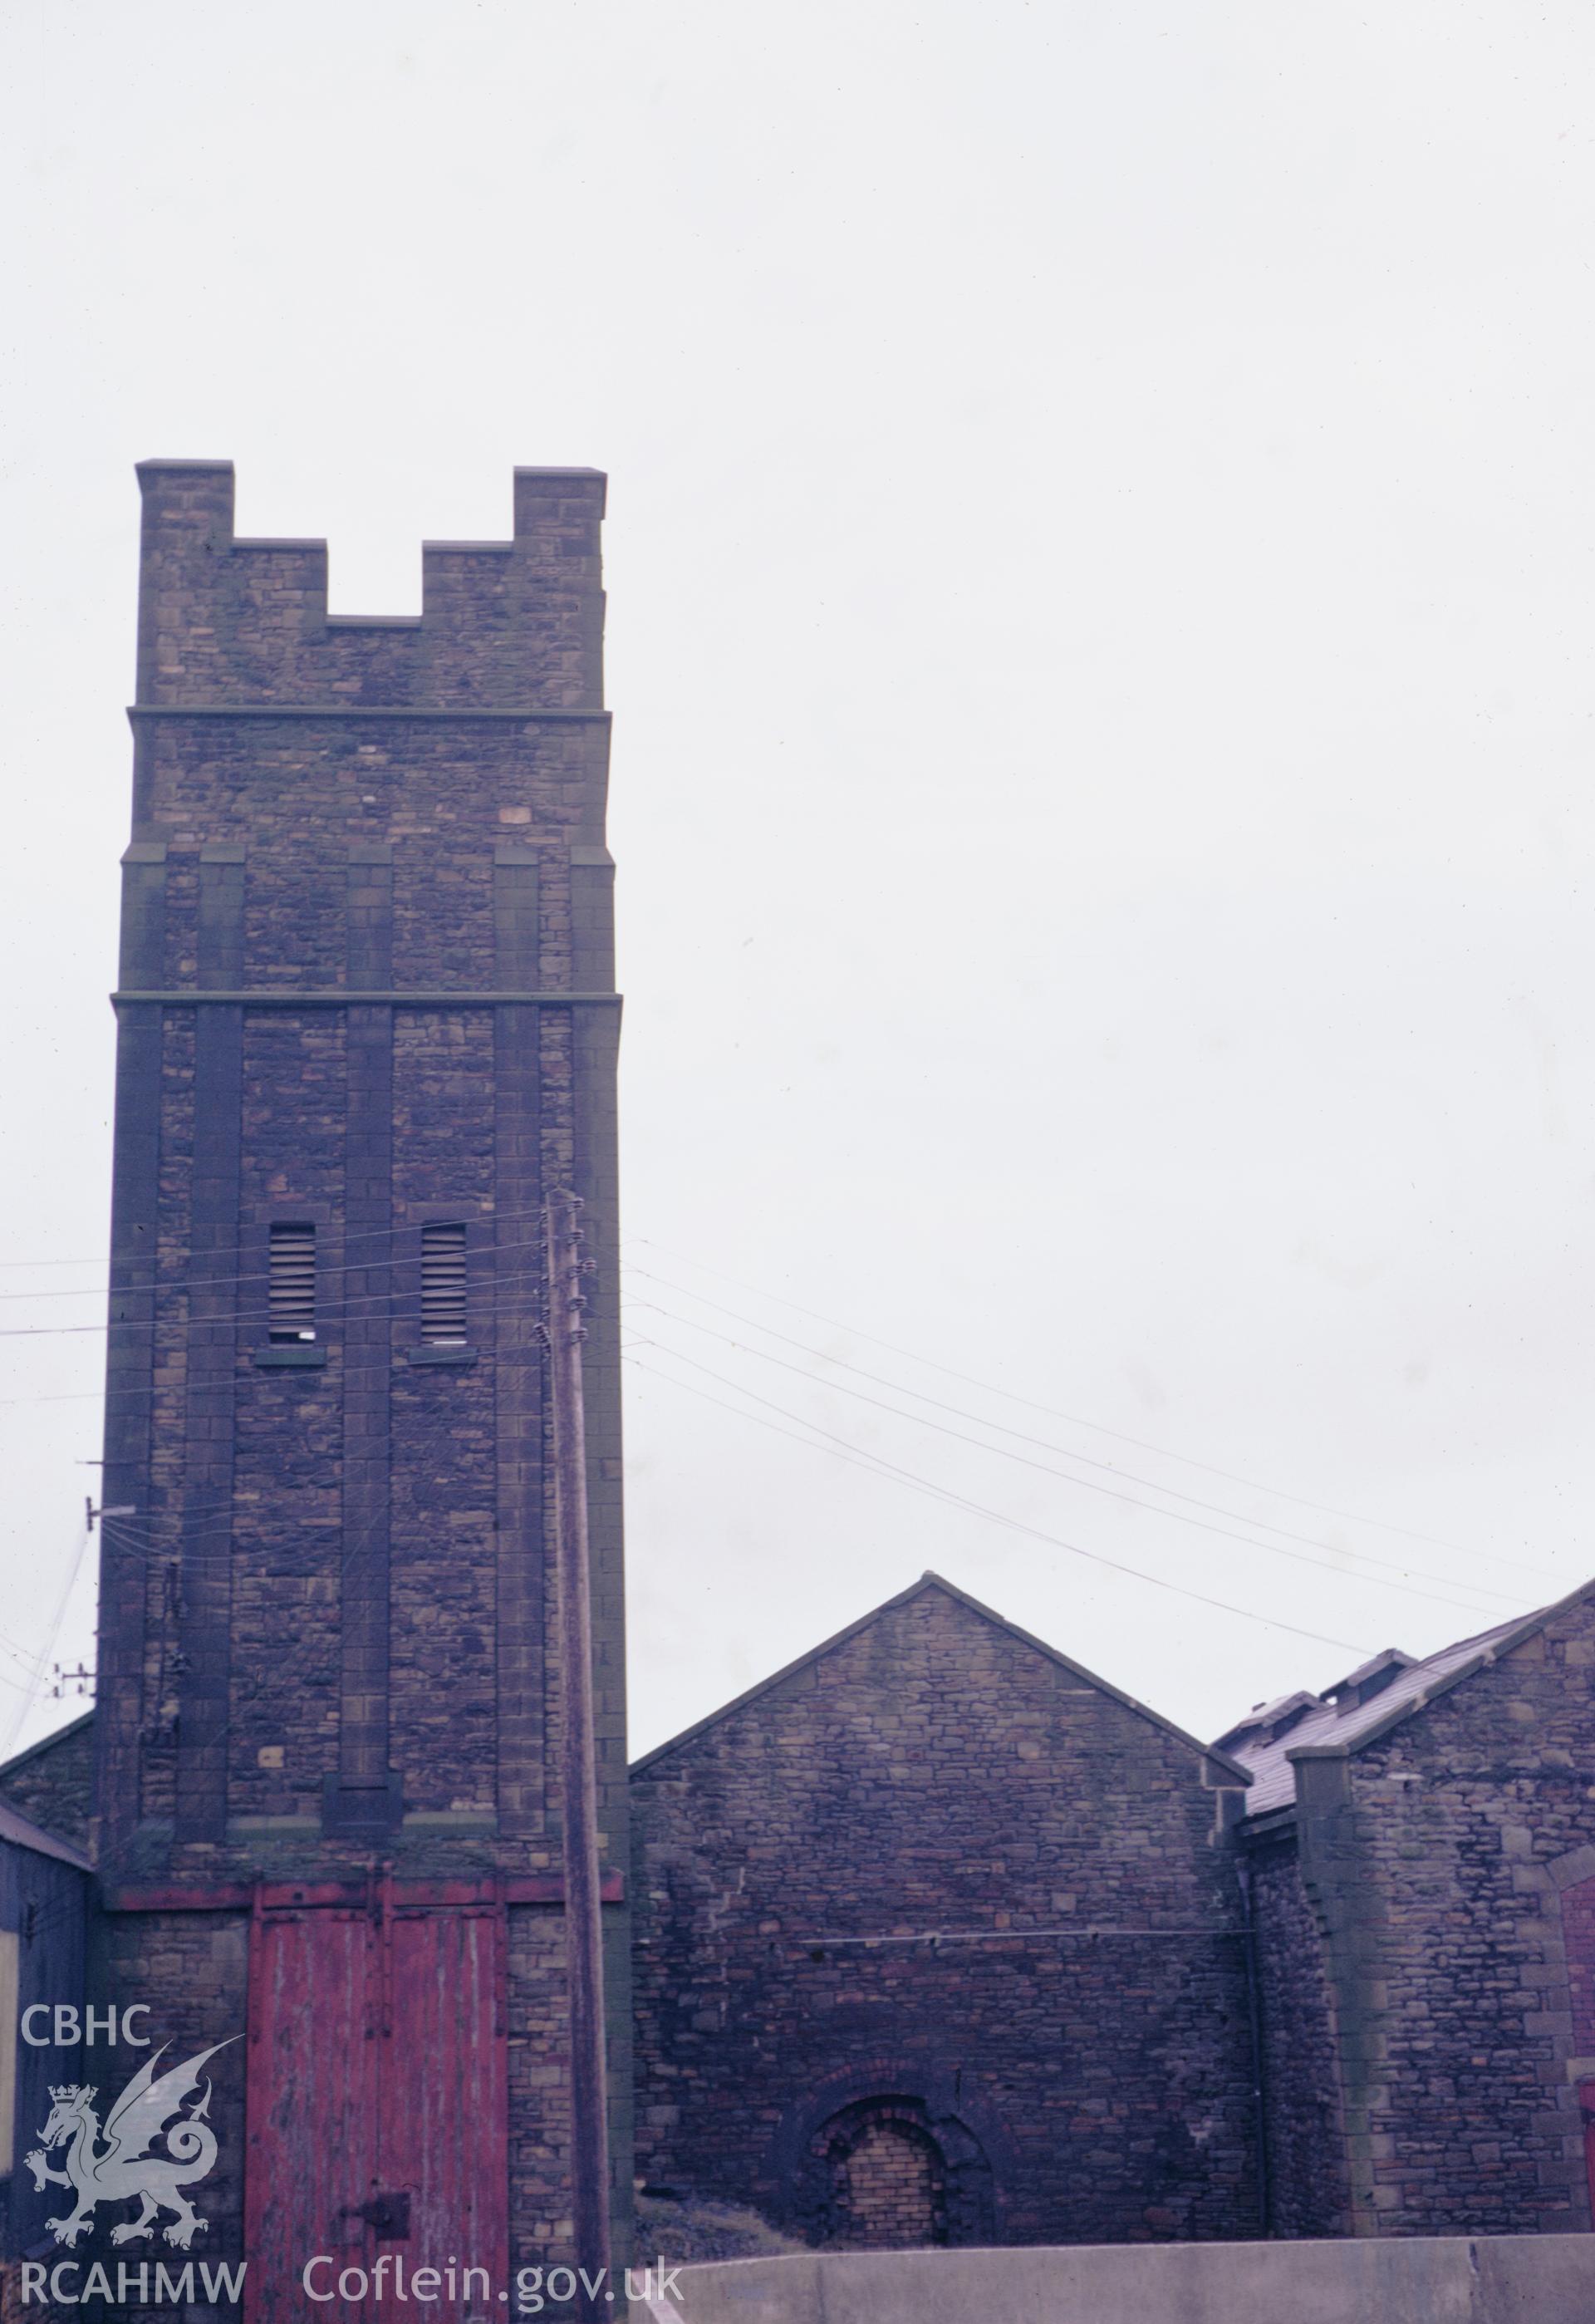 35mm colour slide showing  North Dock Engine House and Accumulator Tower, Llanelli, Carmarthenshire, by Dylan Roberts, undated.